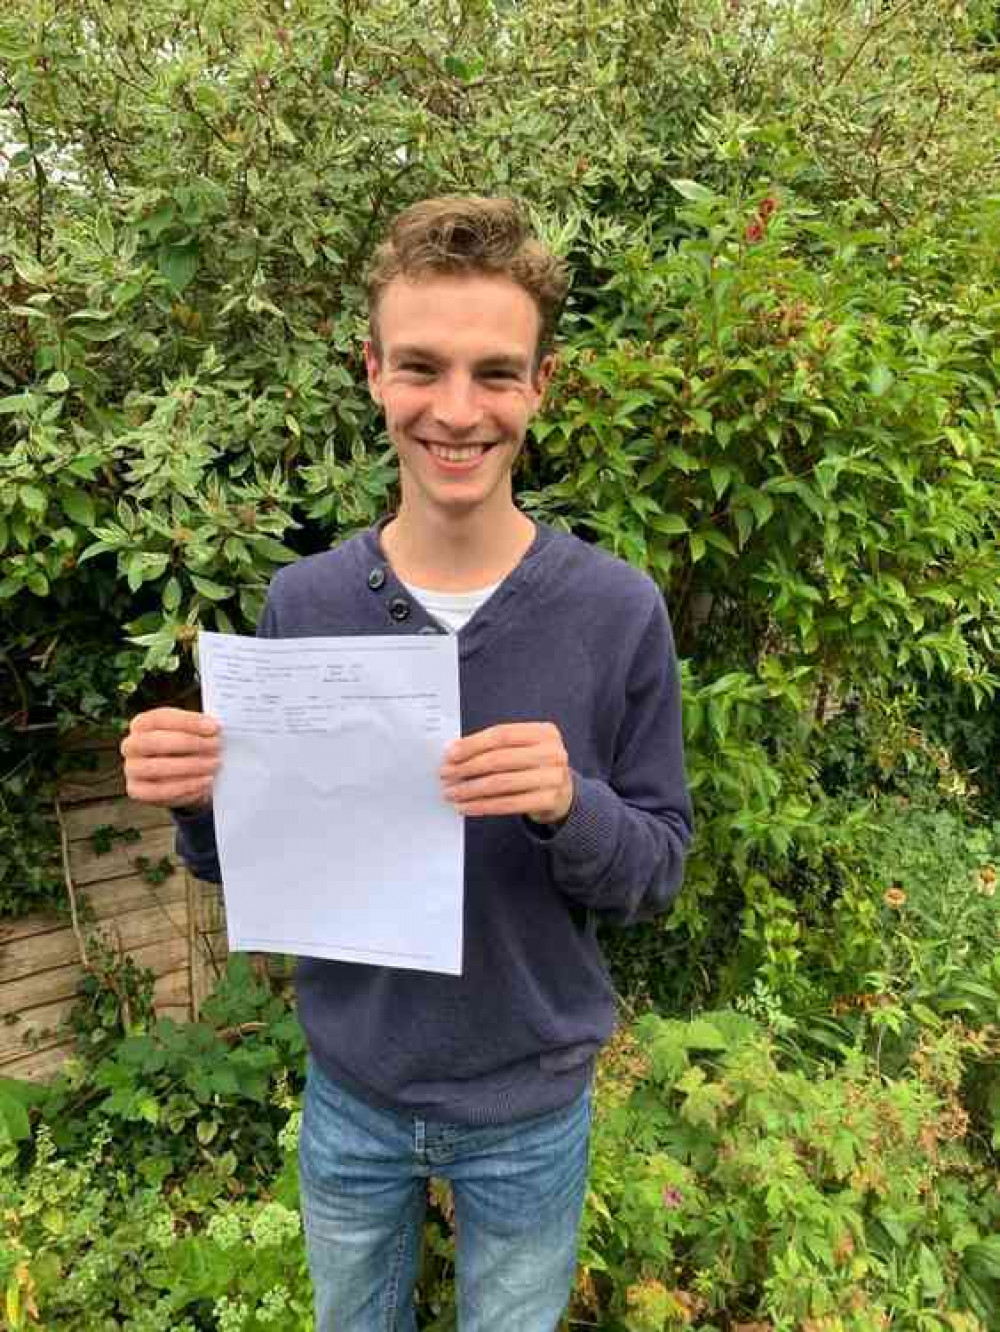 Hitchin A-Level results: 'I just wanted to make my family proud' says Zac Cash